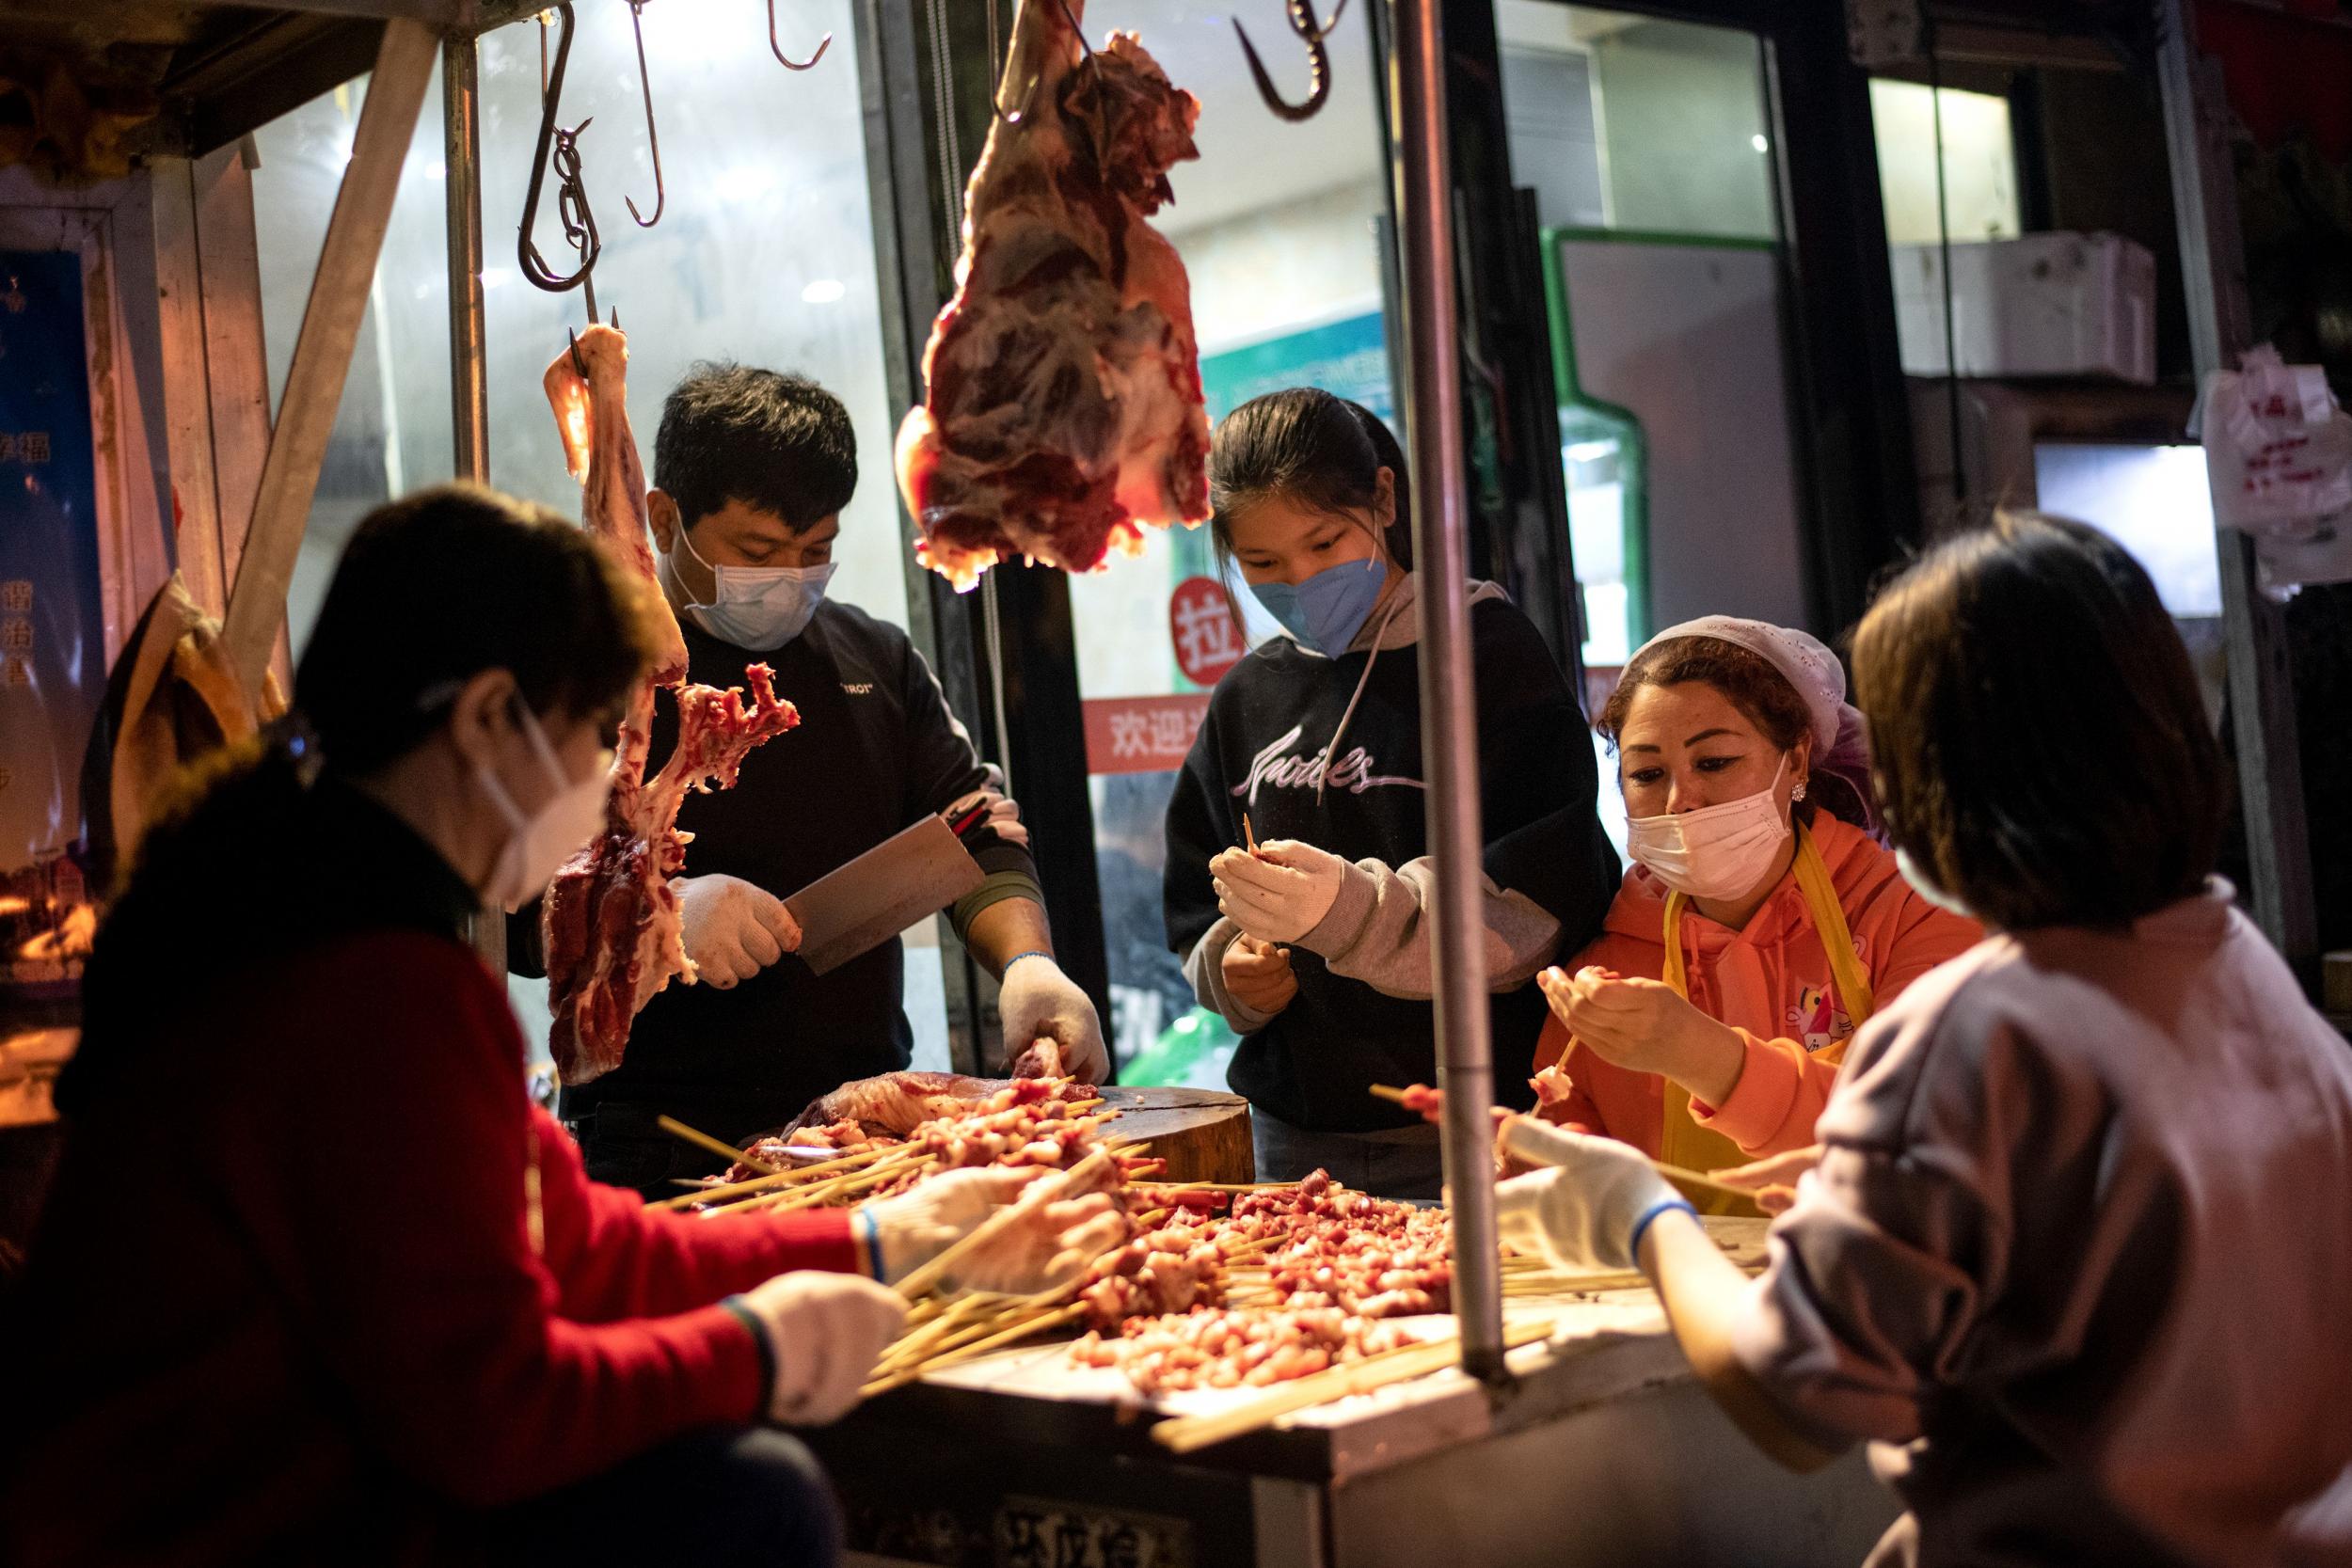 Barbecue meat at a market in Wuhan in April: the first known cluster of Covid-19 was in a wet market